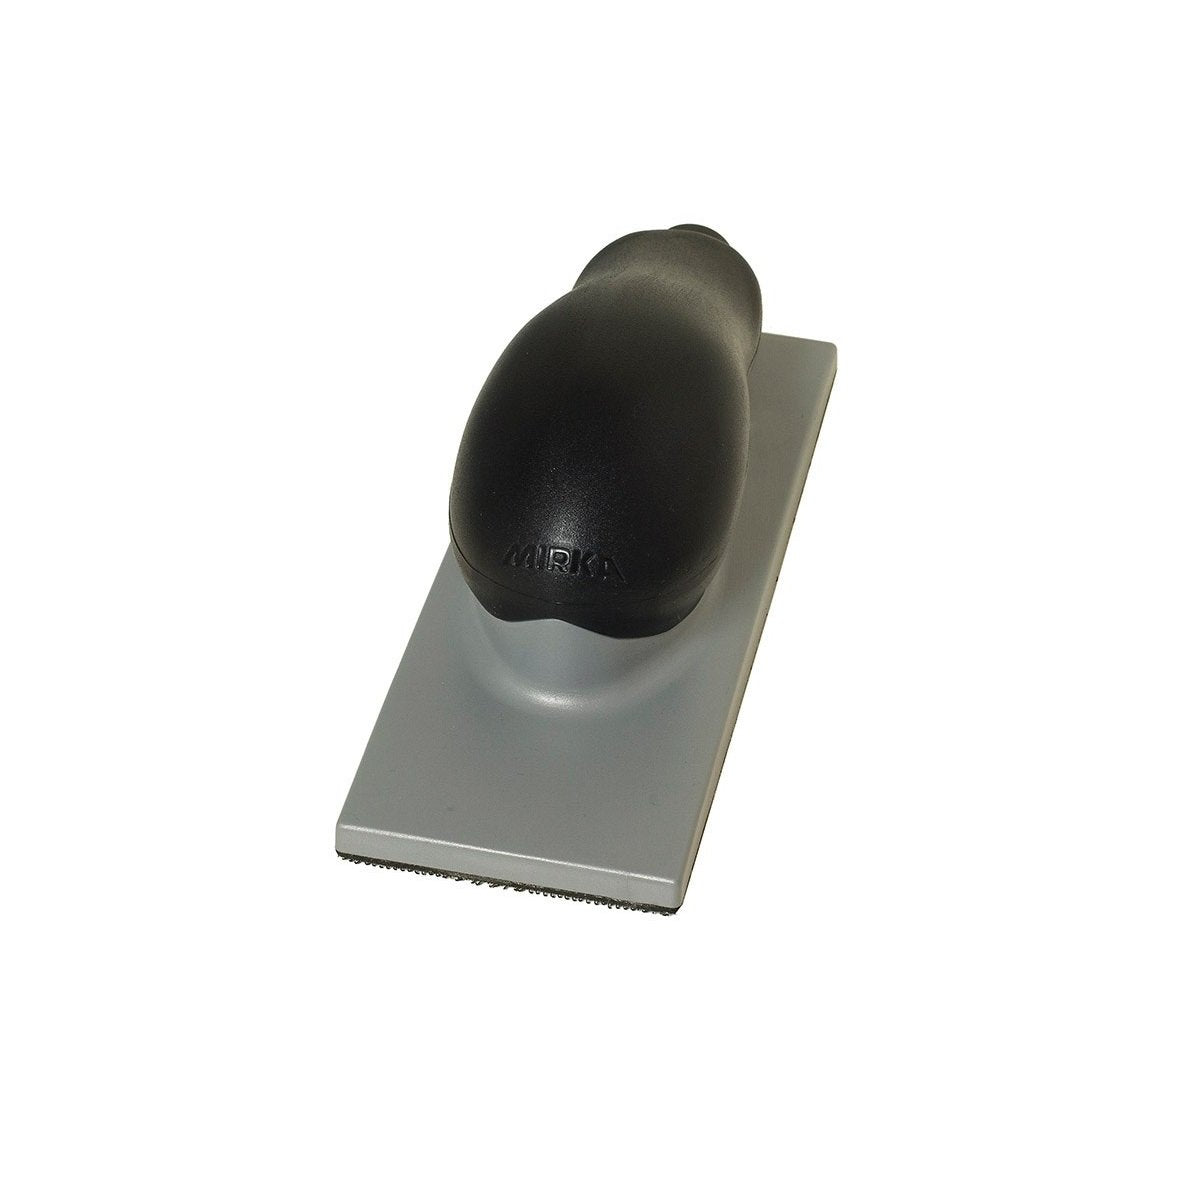 Mirka 70x198mm dust collection hand sanding block with black ergonomic grip, hook facing for loop abrasives, firm grey sole.